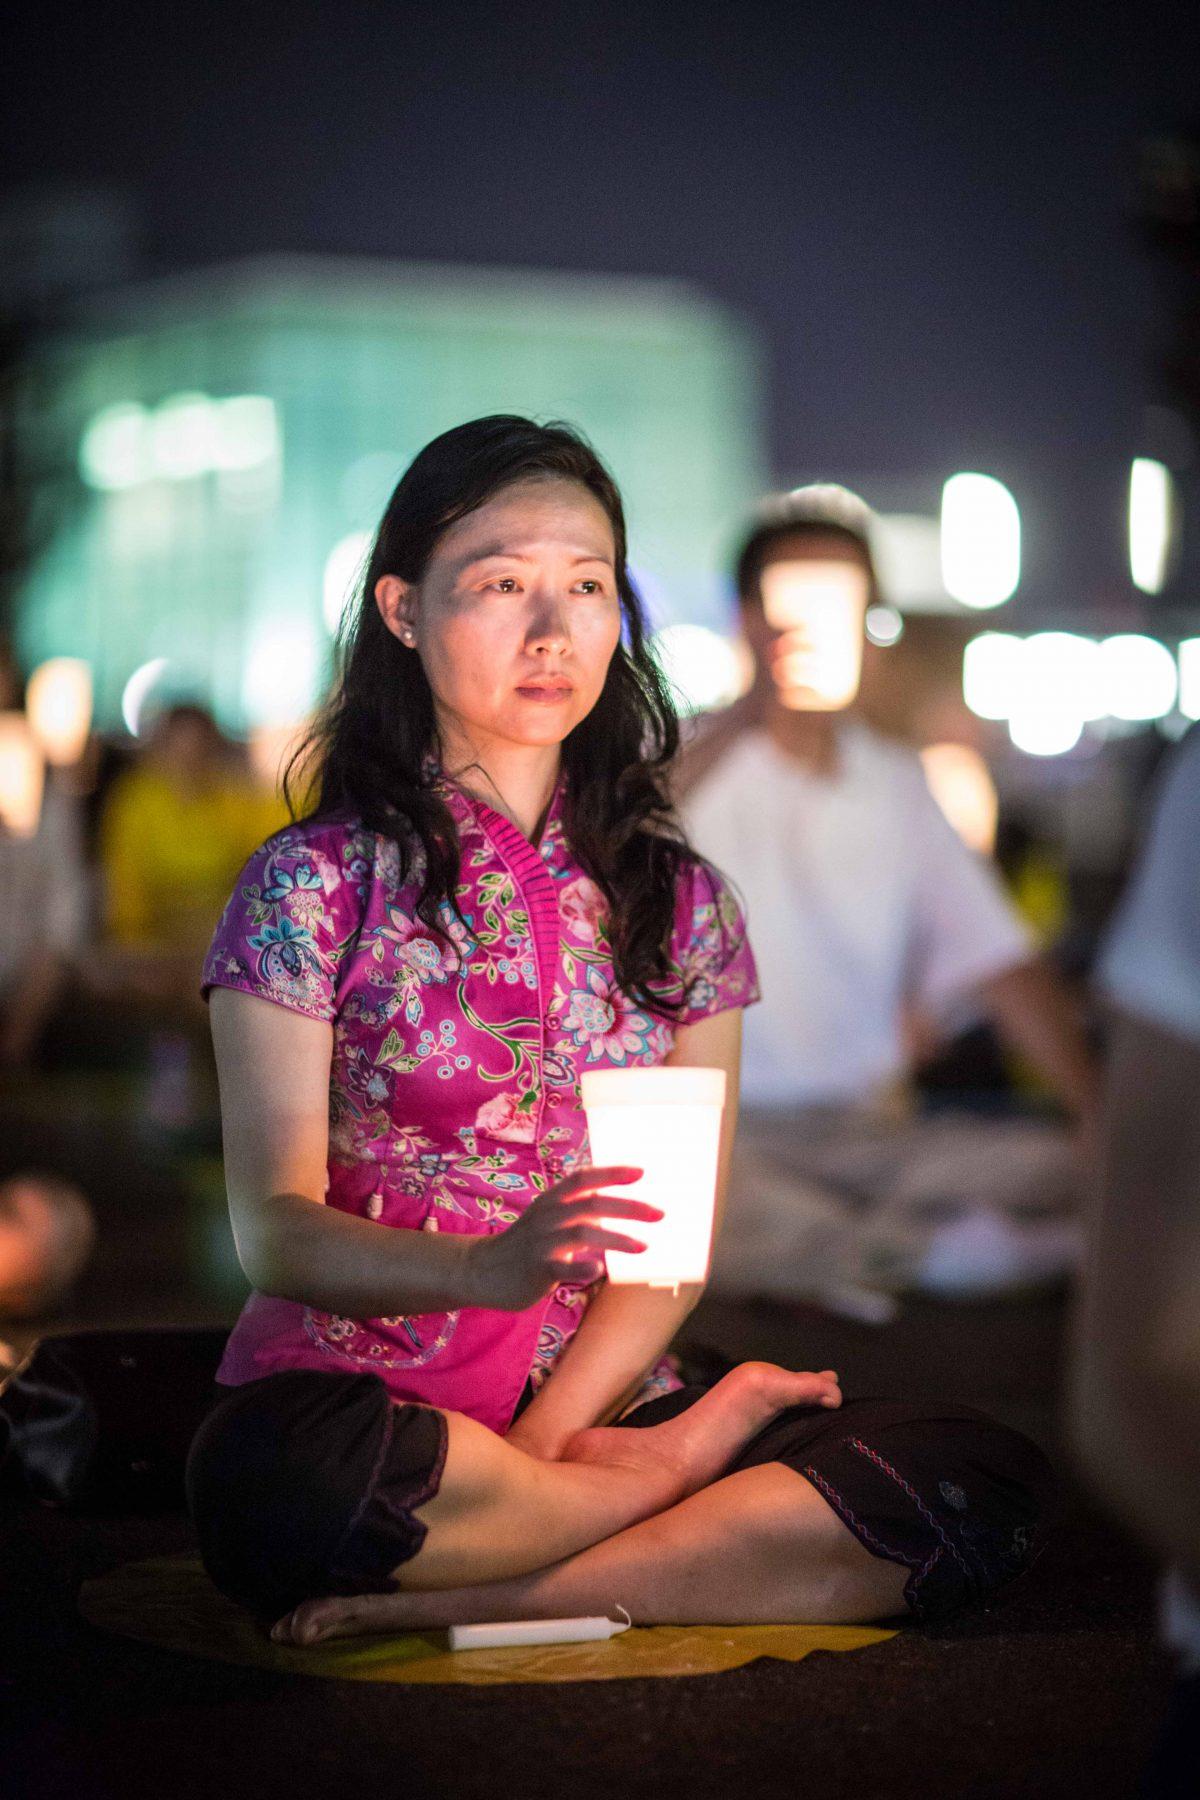 Crystal Chen, a Falun Gong practitioner, takes part in a candlelight vigil in front of the Chinese Consulate in New York on July 20, 2016. (The Epoch Times)